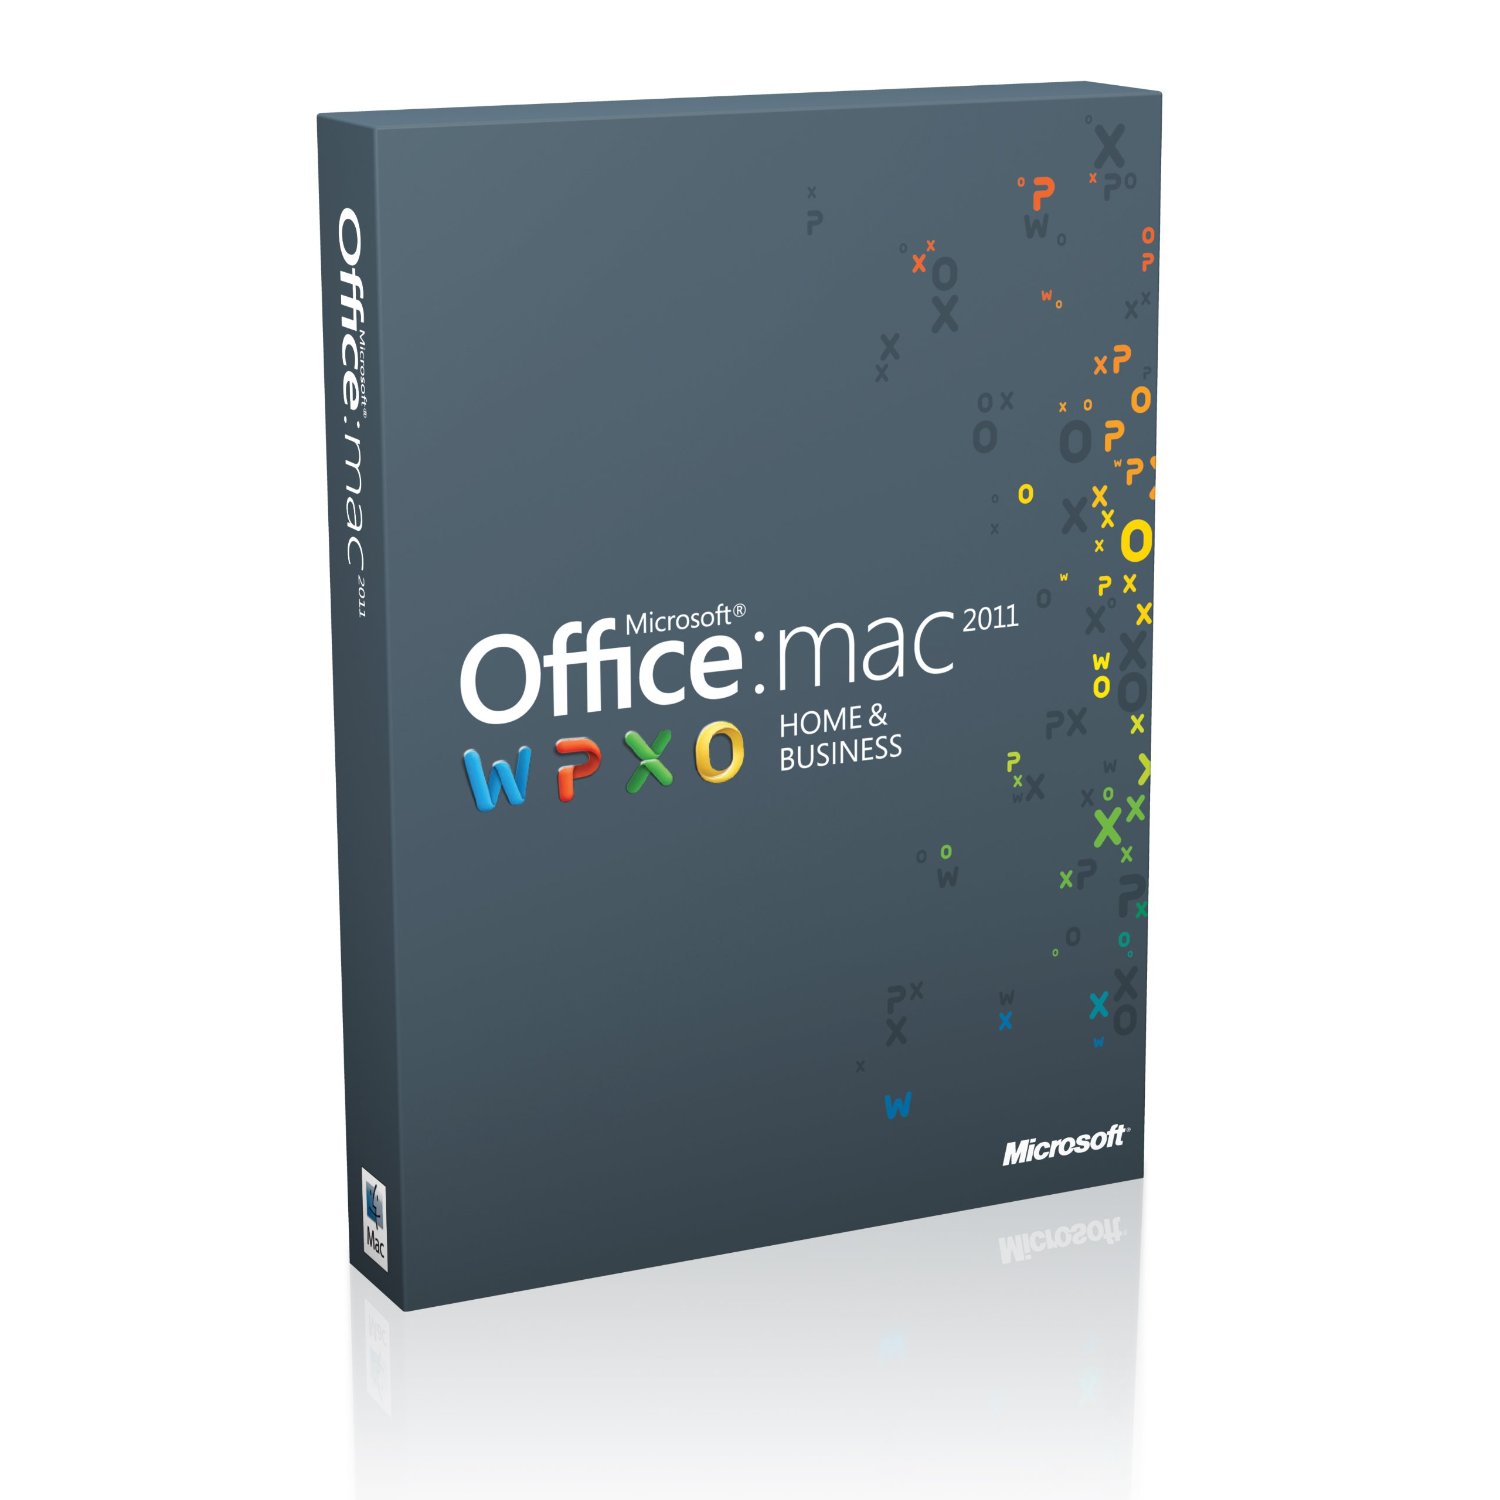 Ms office free for mac